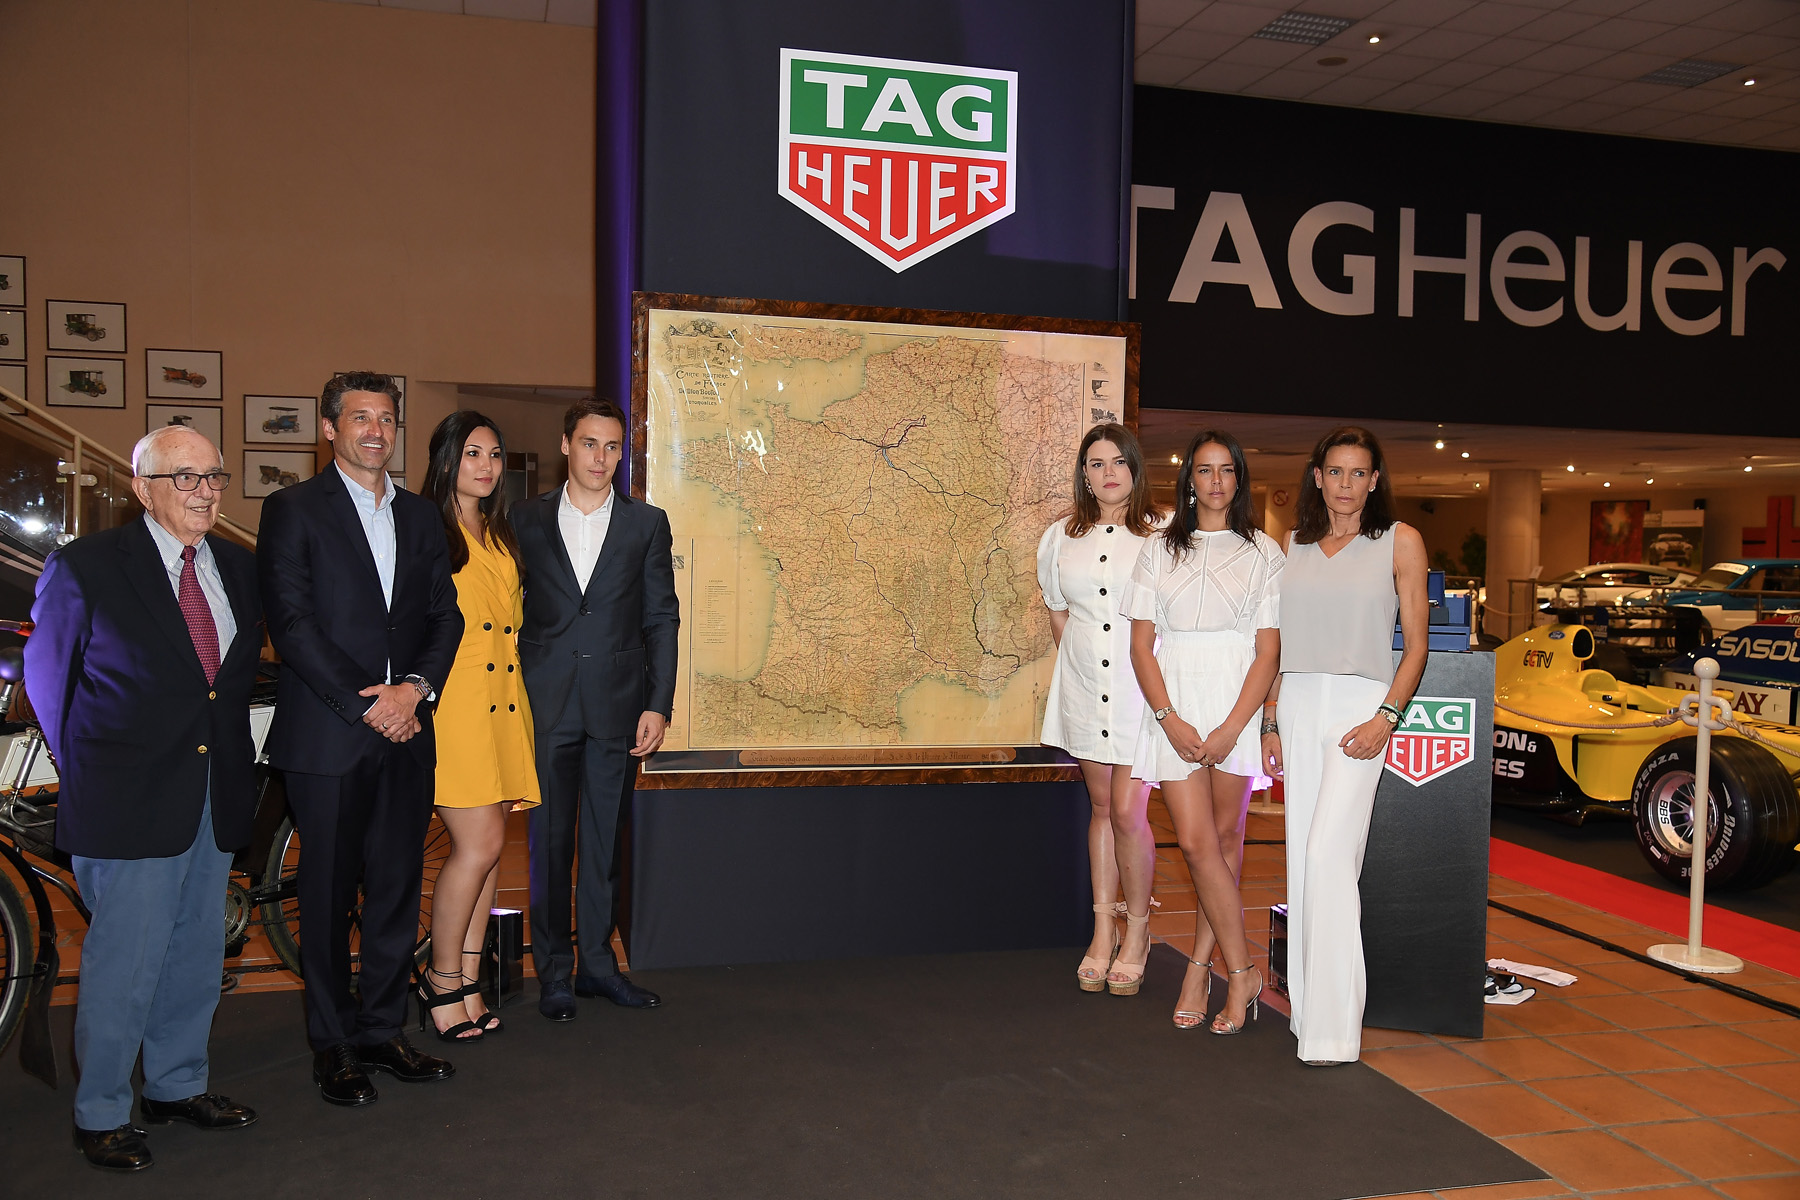 TAG Heuer reveal of the map of Albert 1